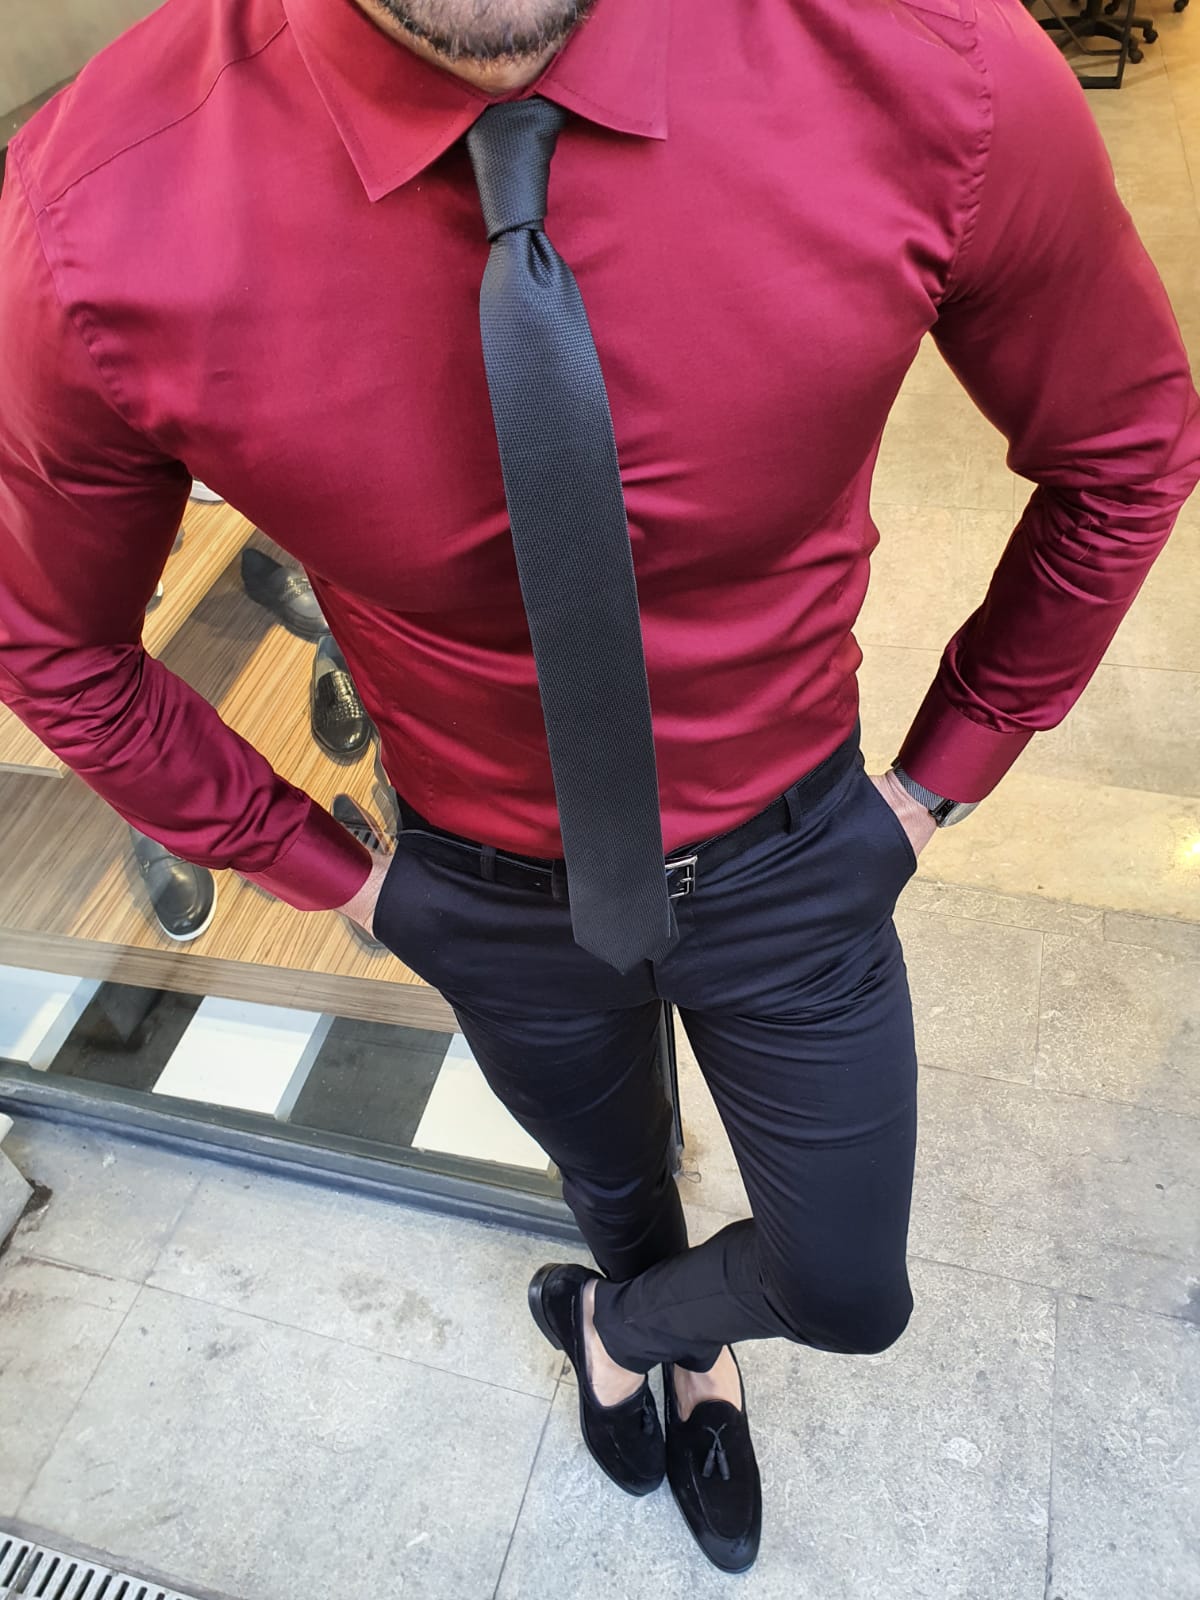 voorspelling Prelude Serena Buy Burgundy Slim Fit Cotton Shirt by GentWith.com with Free Shipping